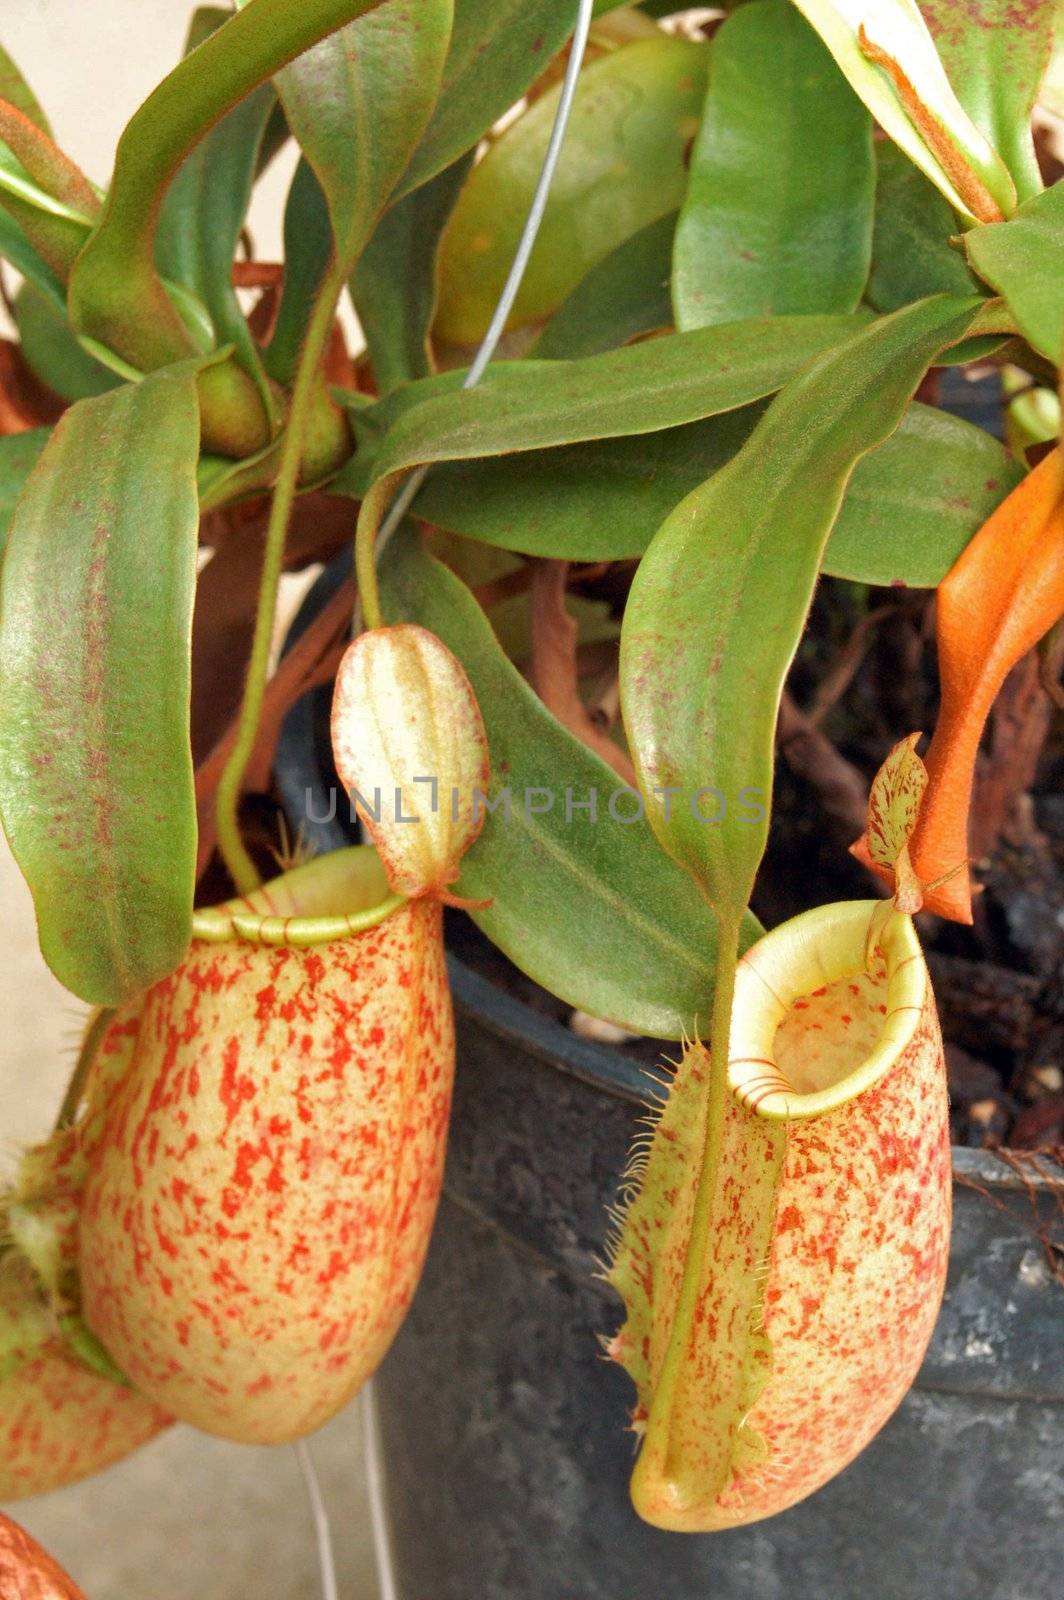 Pitcher Plant Nepenthes Truncata is a carnivorous plant that feeds on insects